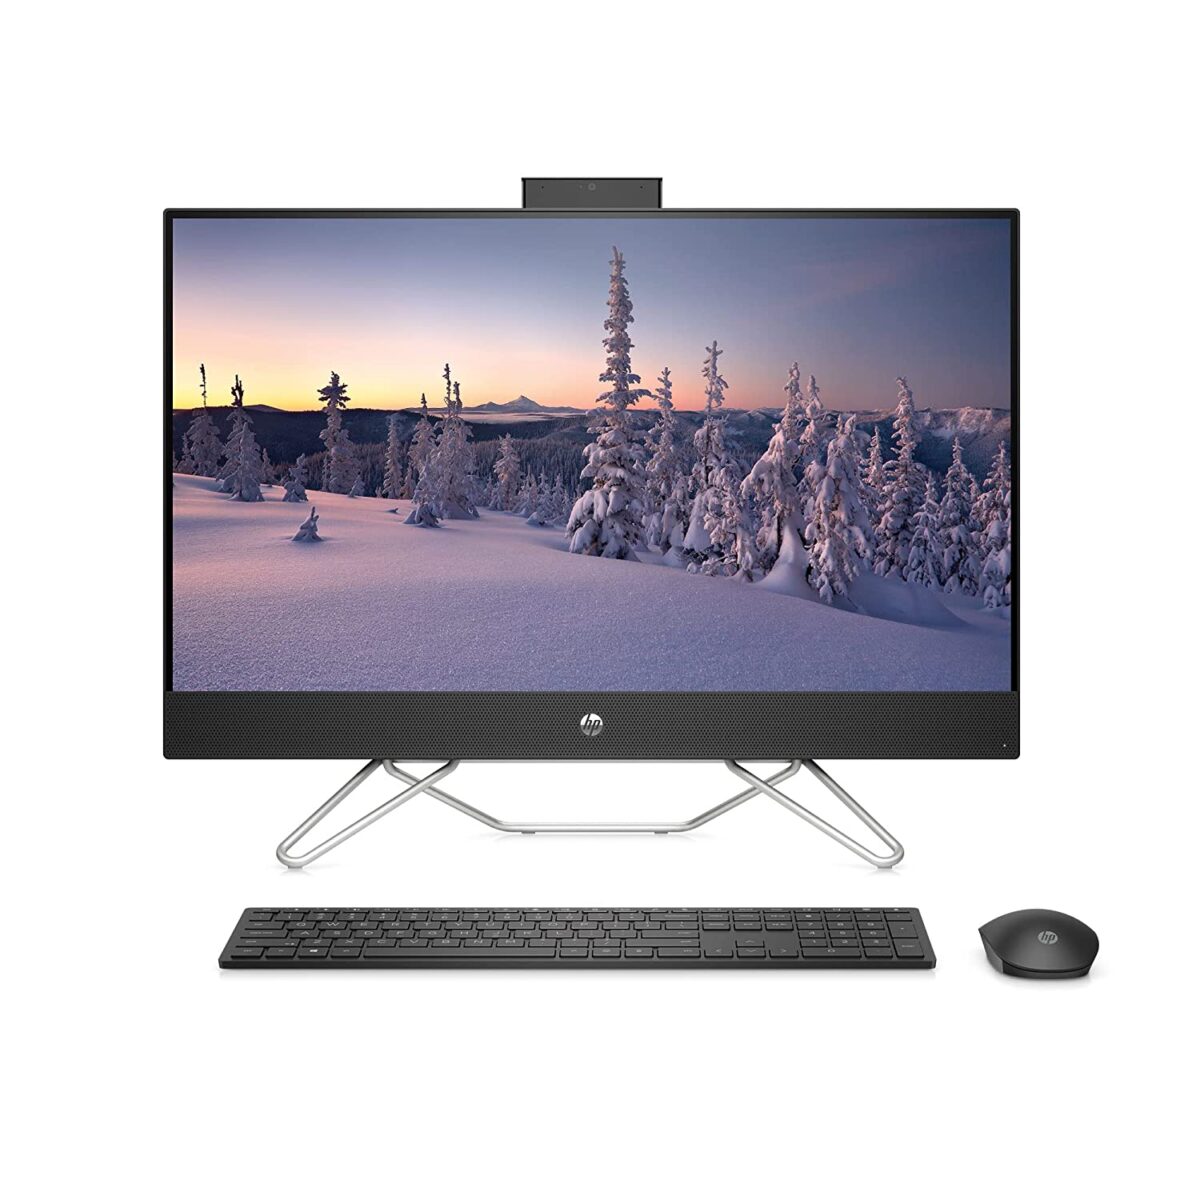 HP All-in-One PC 27-cb1153in with 12th Gen Intel Processor Launched in India